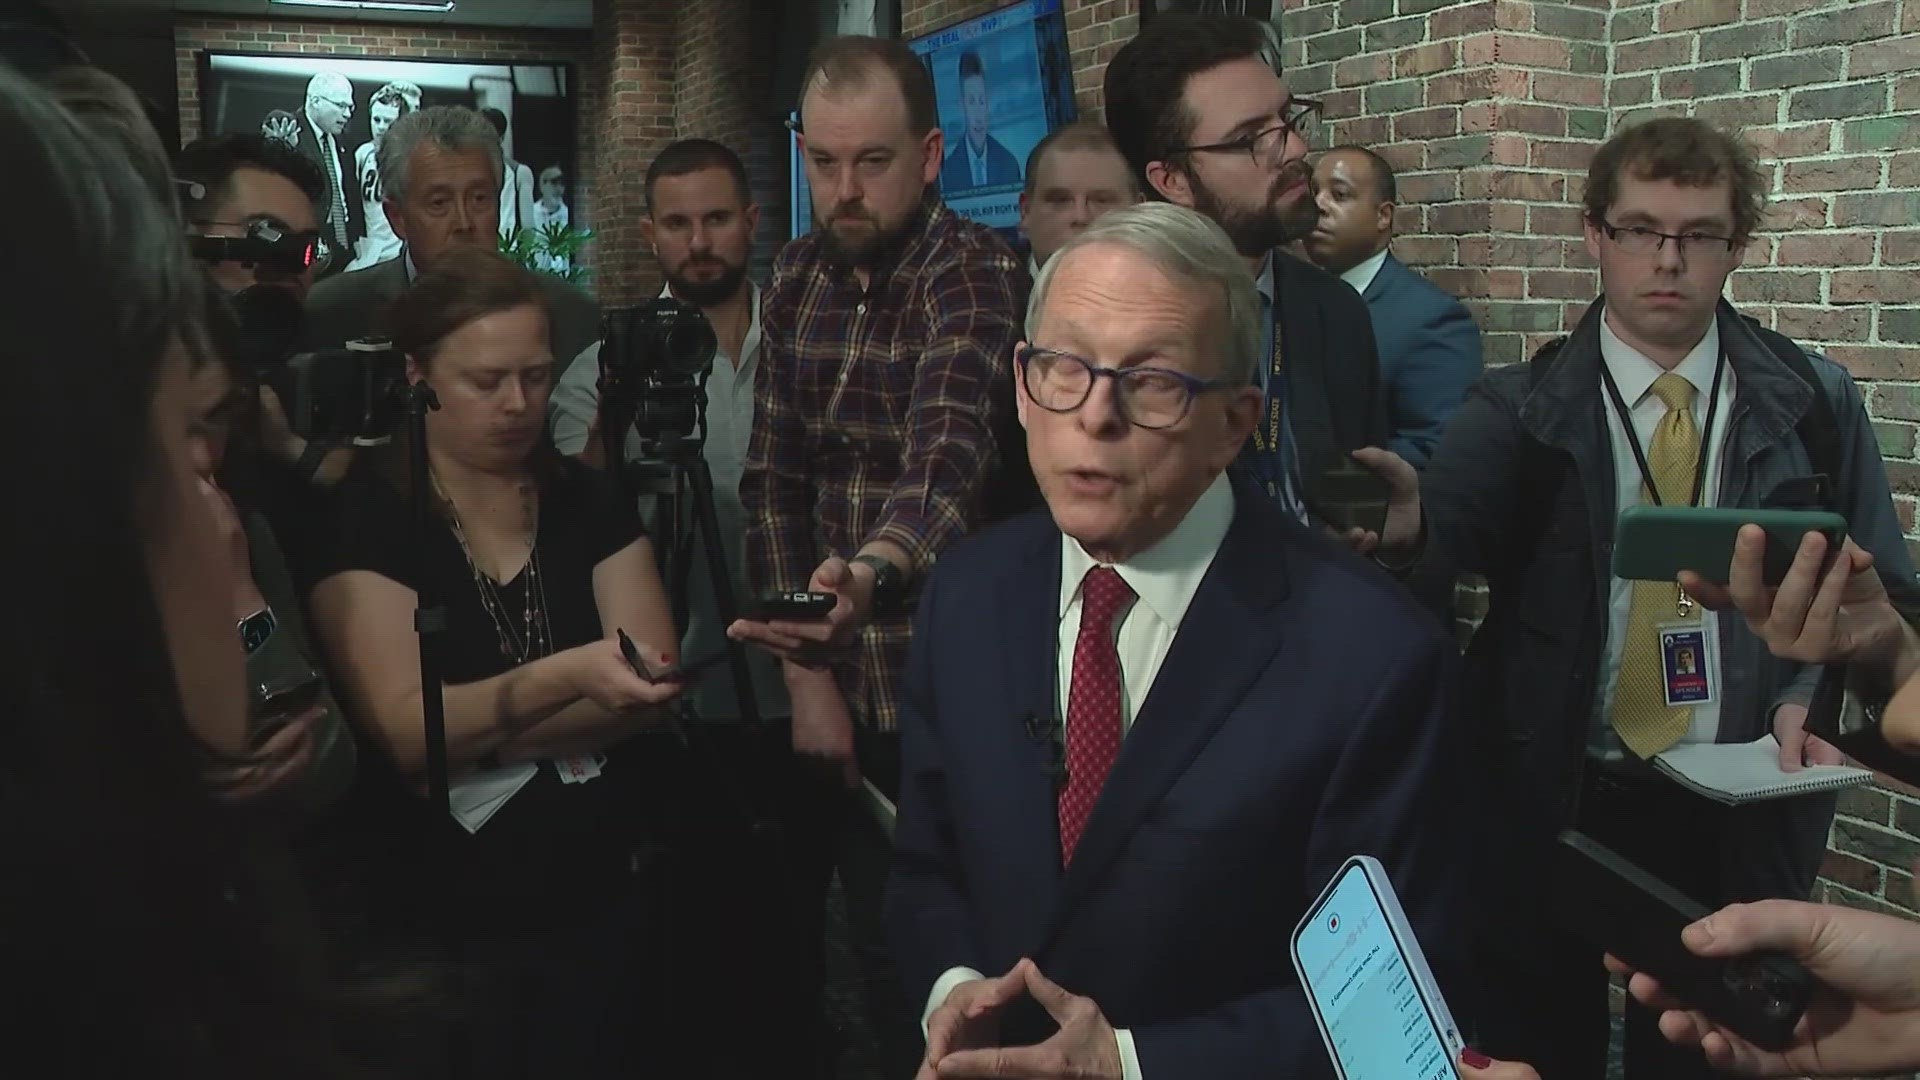 DeWine said for him, Issue 1 was never about politics, it was about what he thought was right.